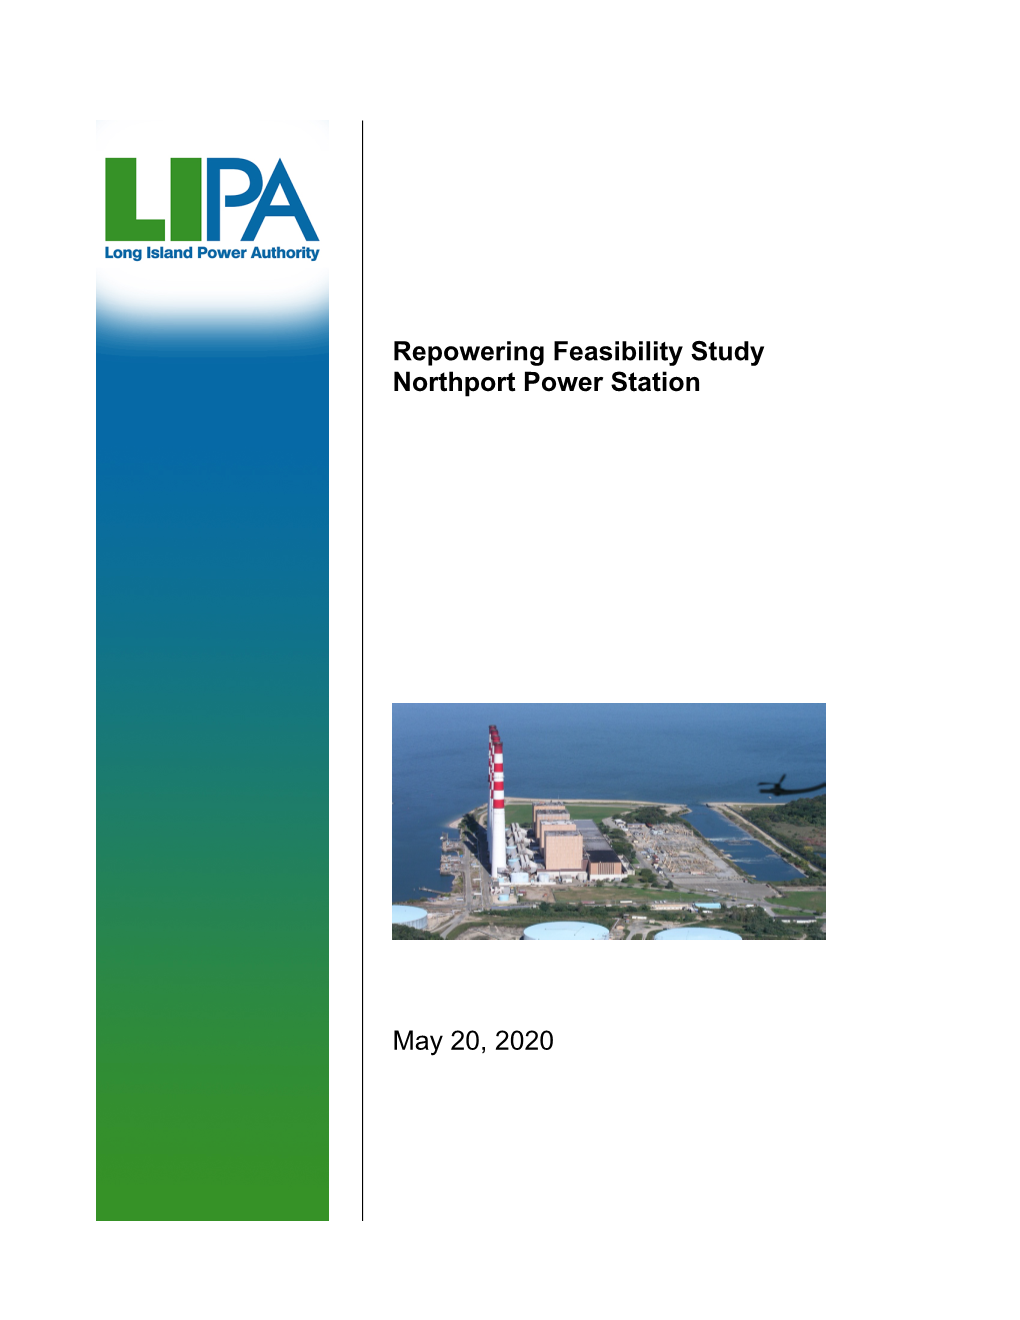 Repowering Feasibility Study Northport Power Station May 20, 2020